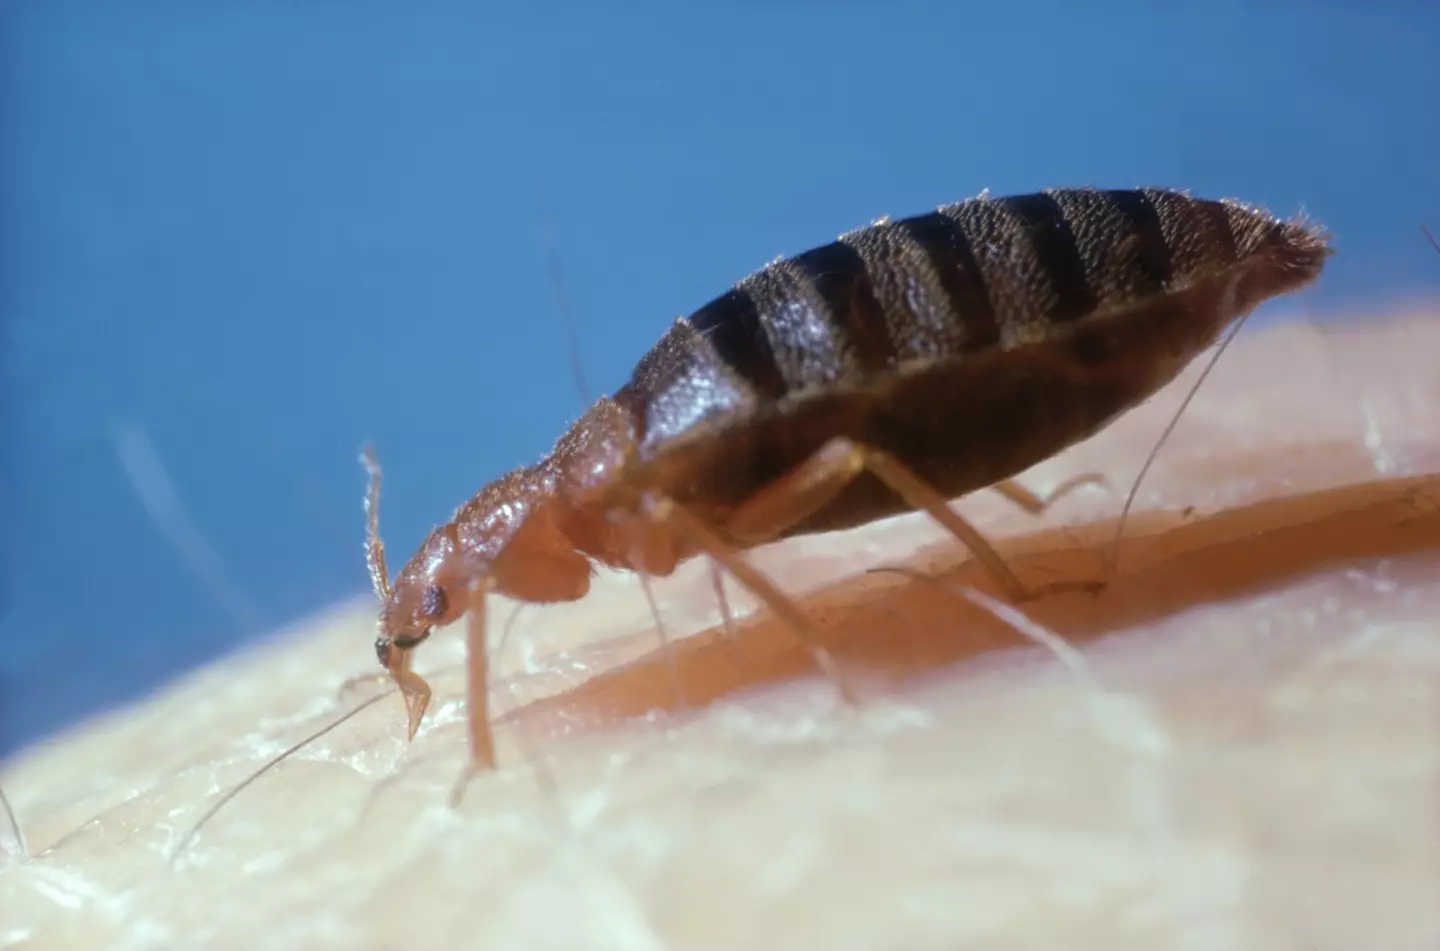 Unfortunately, bed bugs are already in the UK.